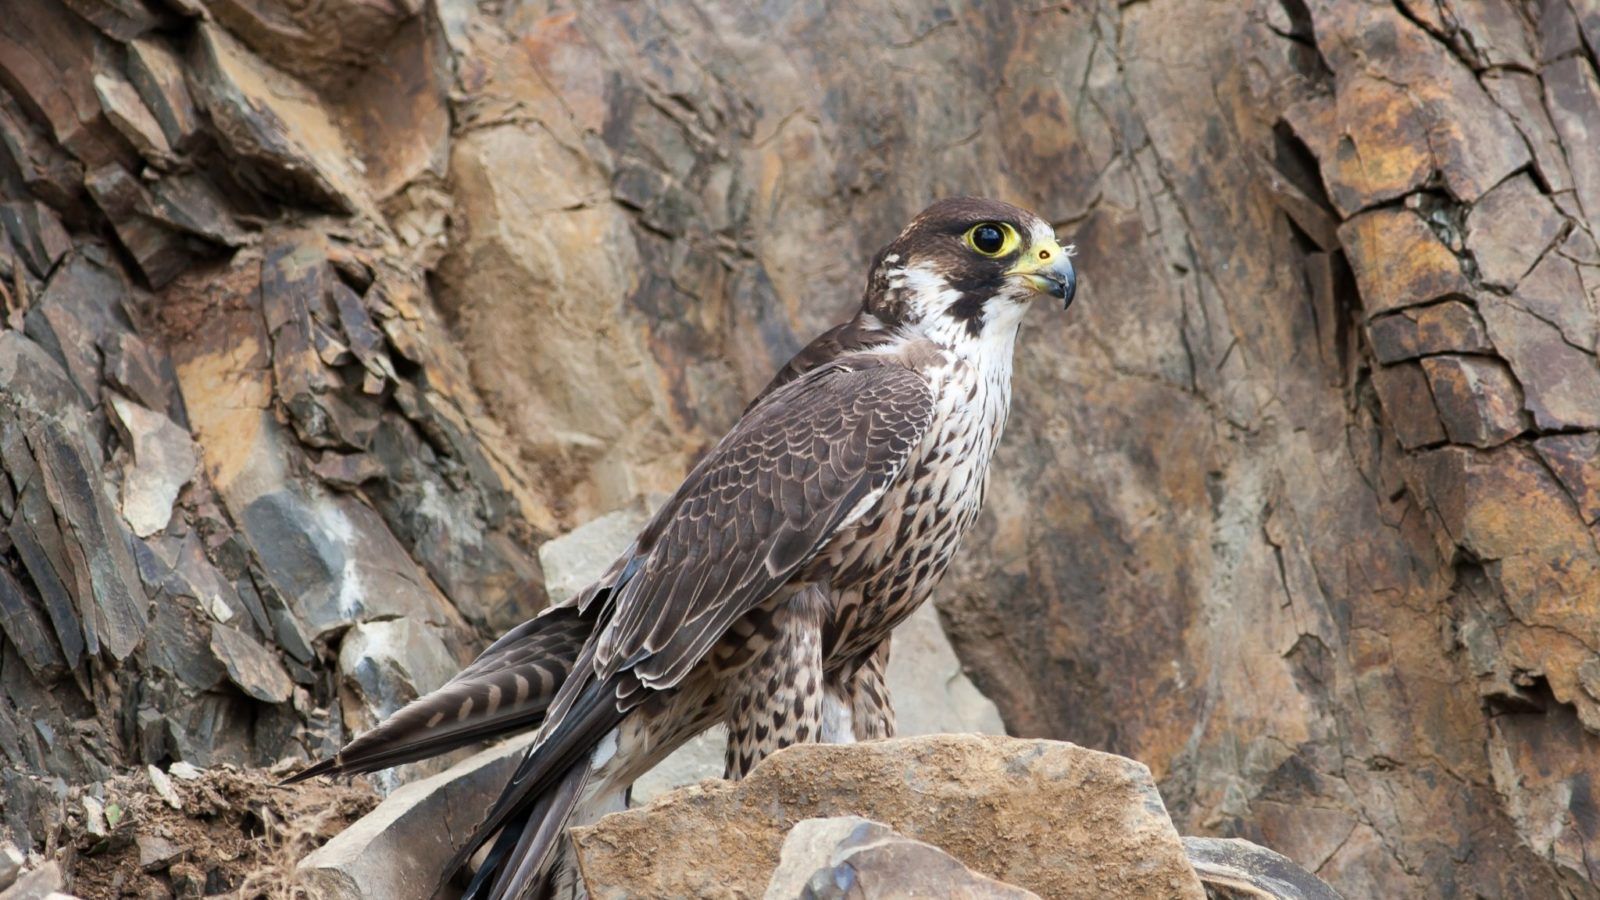 Peregrine Falcon sitting on a cliff face